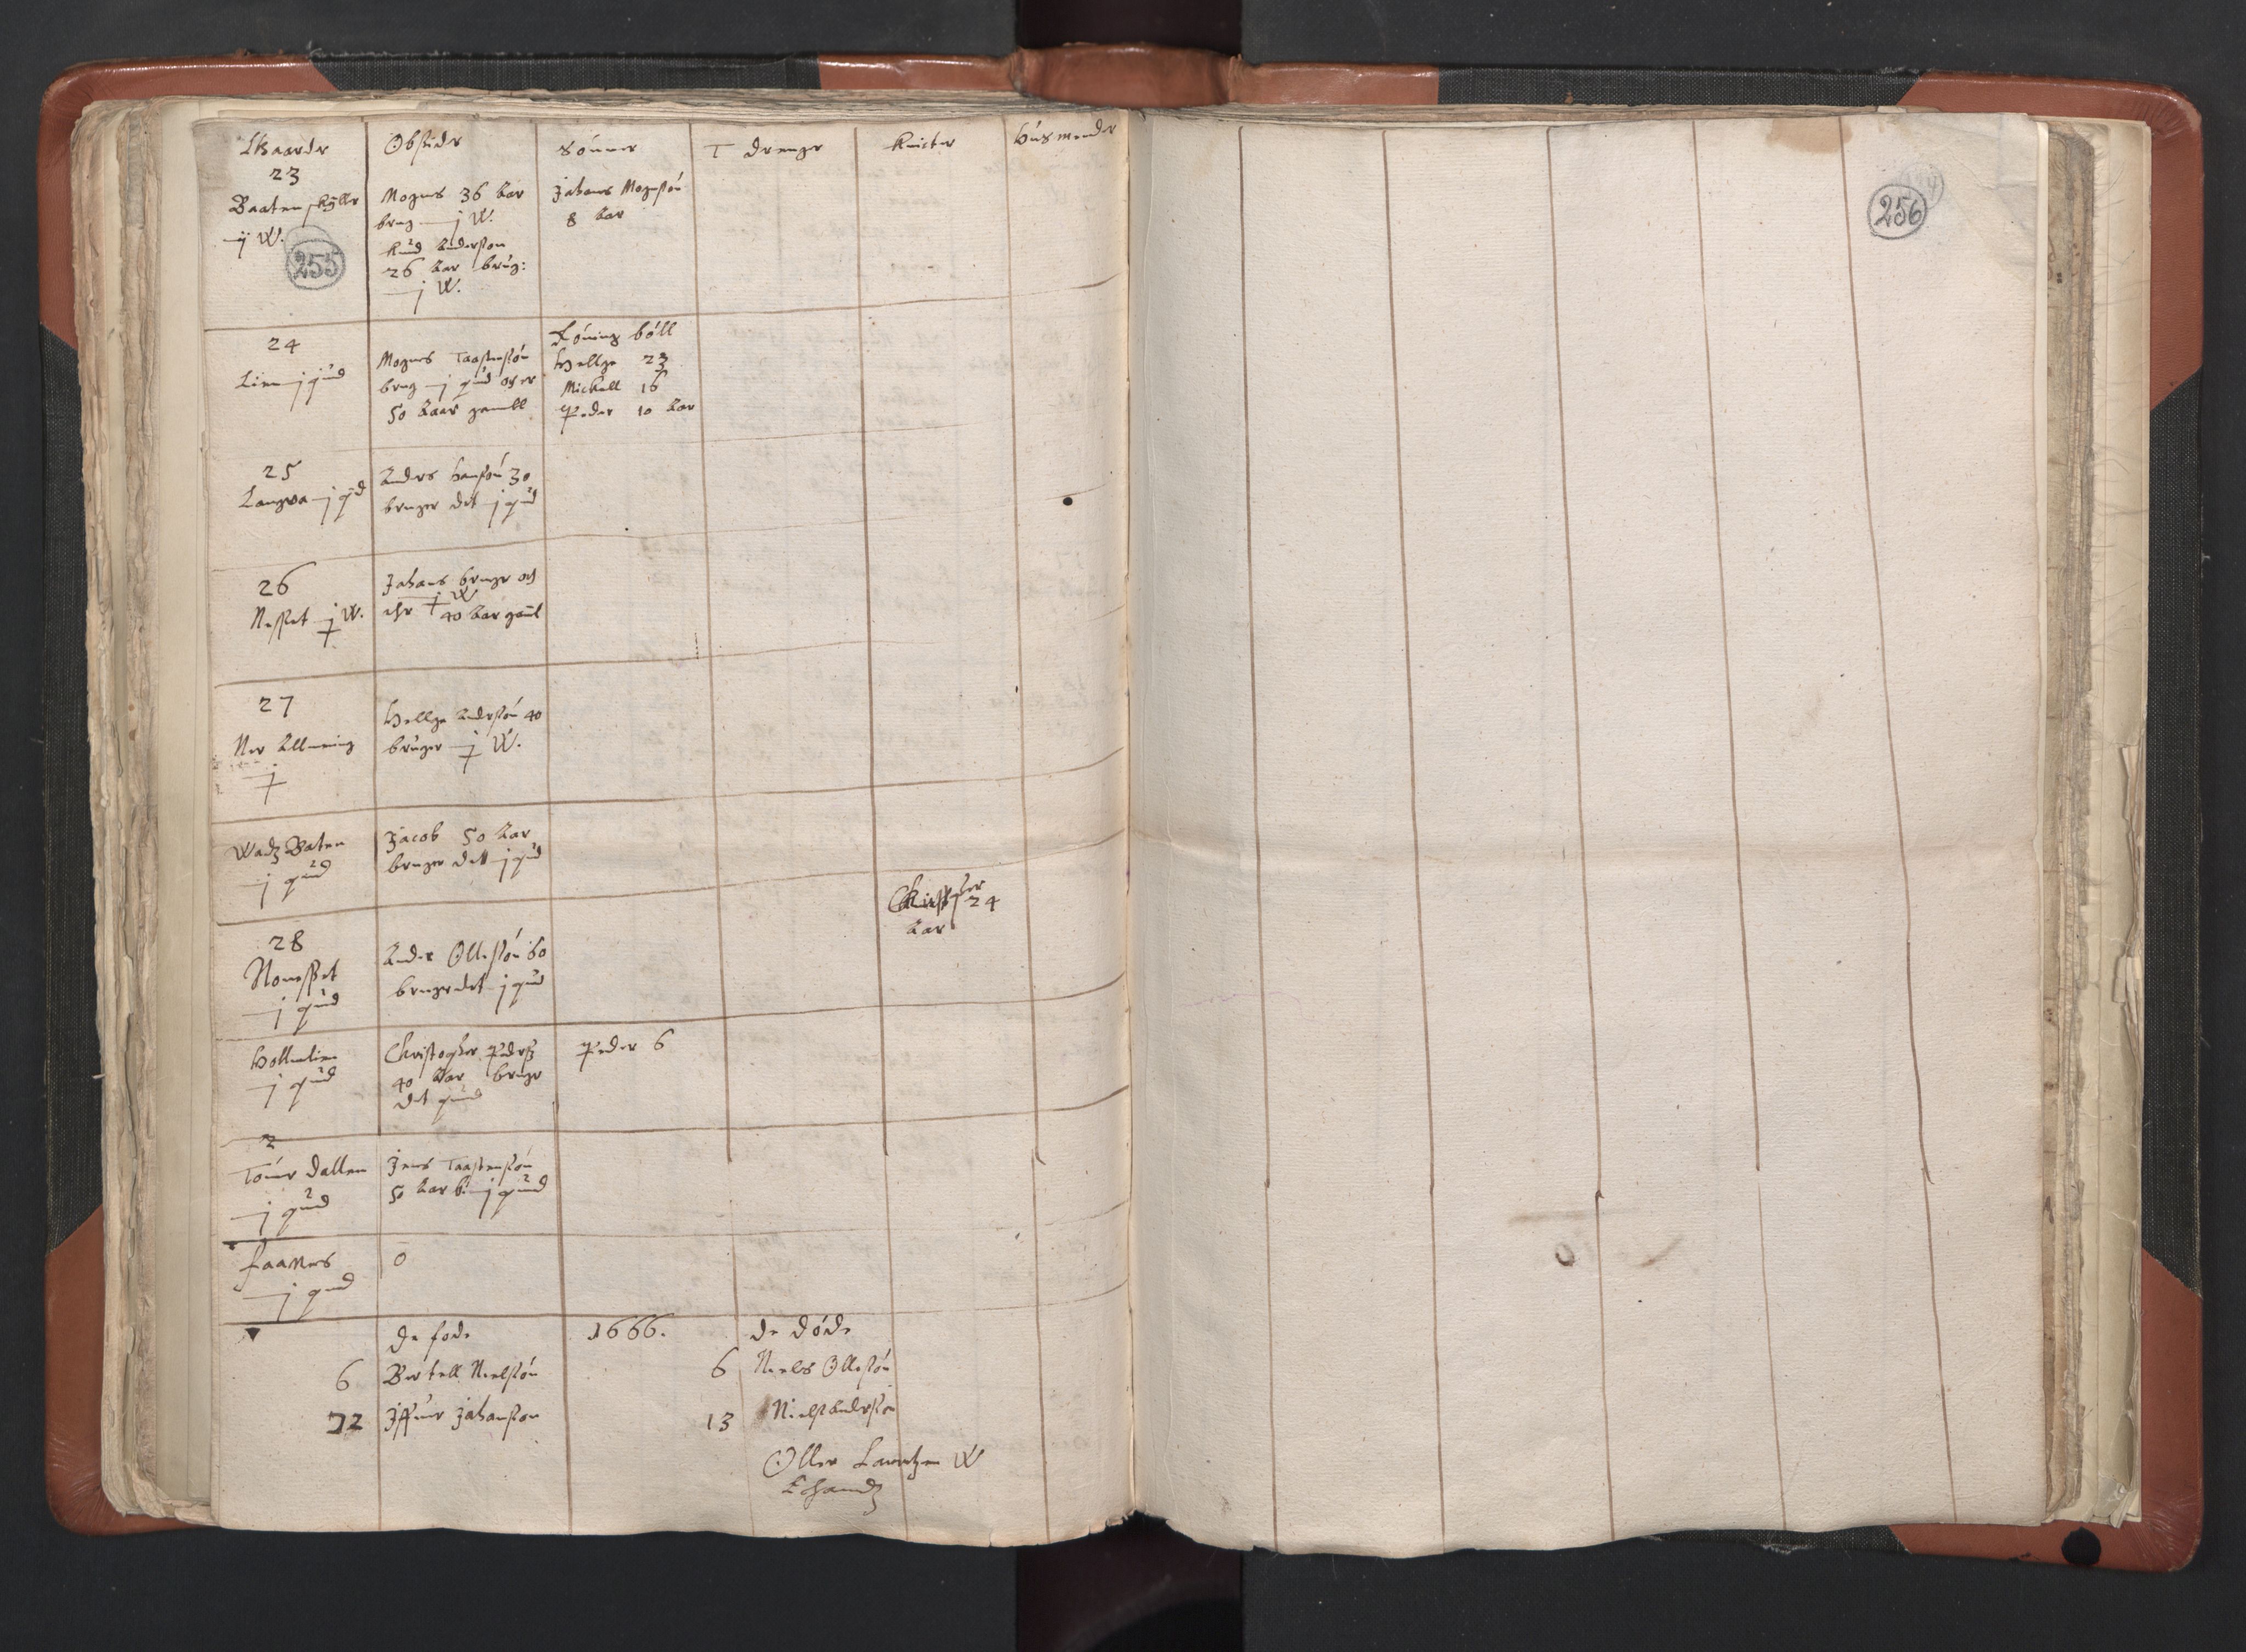 RA, Vicar's Census 1664-1666, no. 35: Helgeland deanery and Salten deanery, 1664-1666, p. 255-256